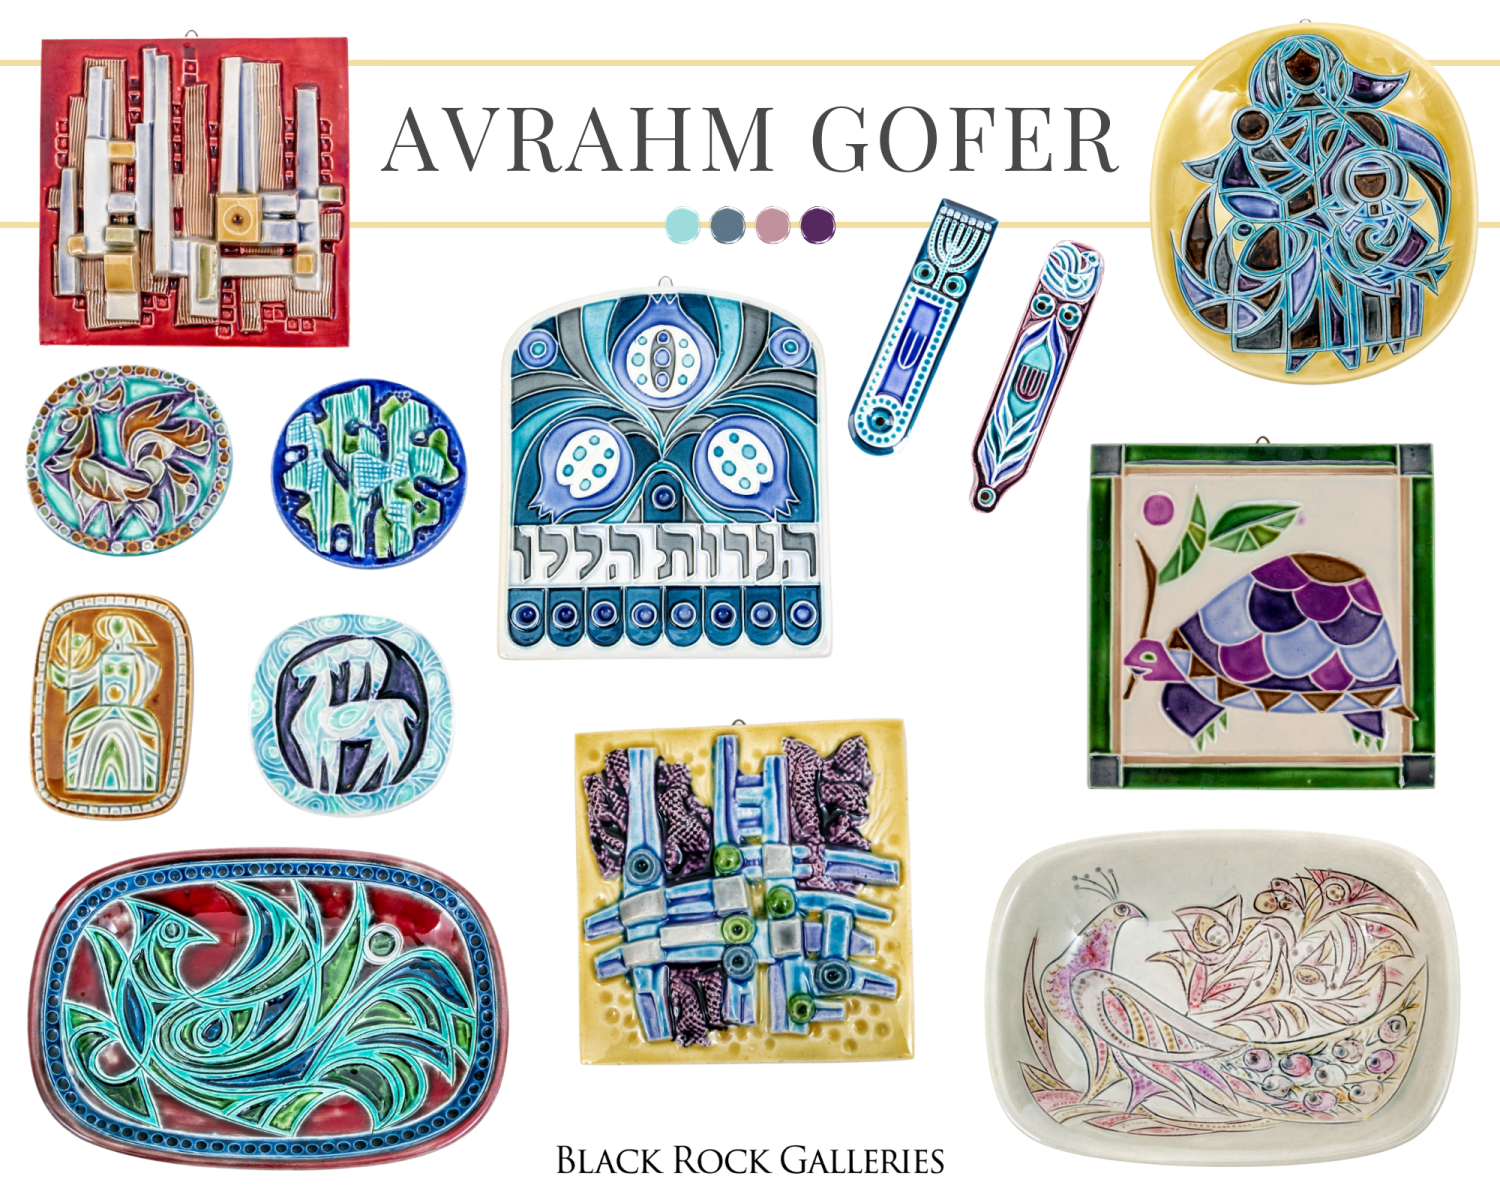 Miriam owns the largest collection of Jewish art pottery by Avraham Gofer besides the artist himself.